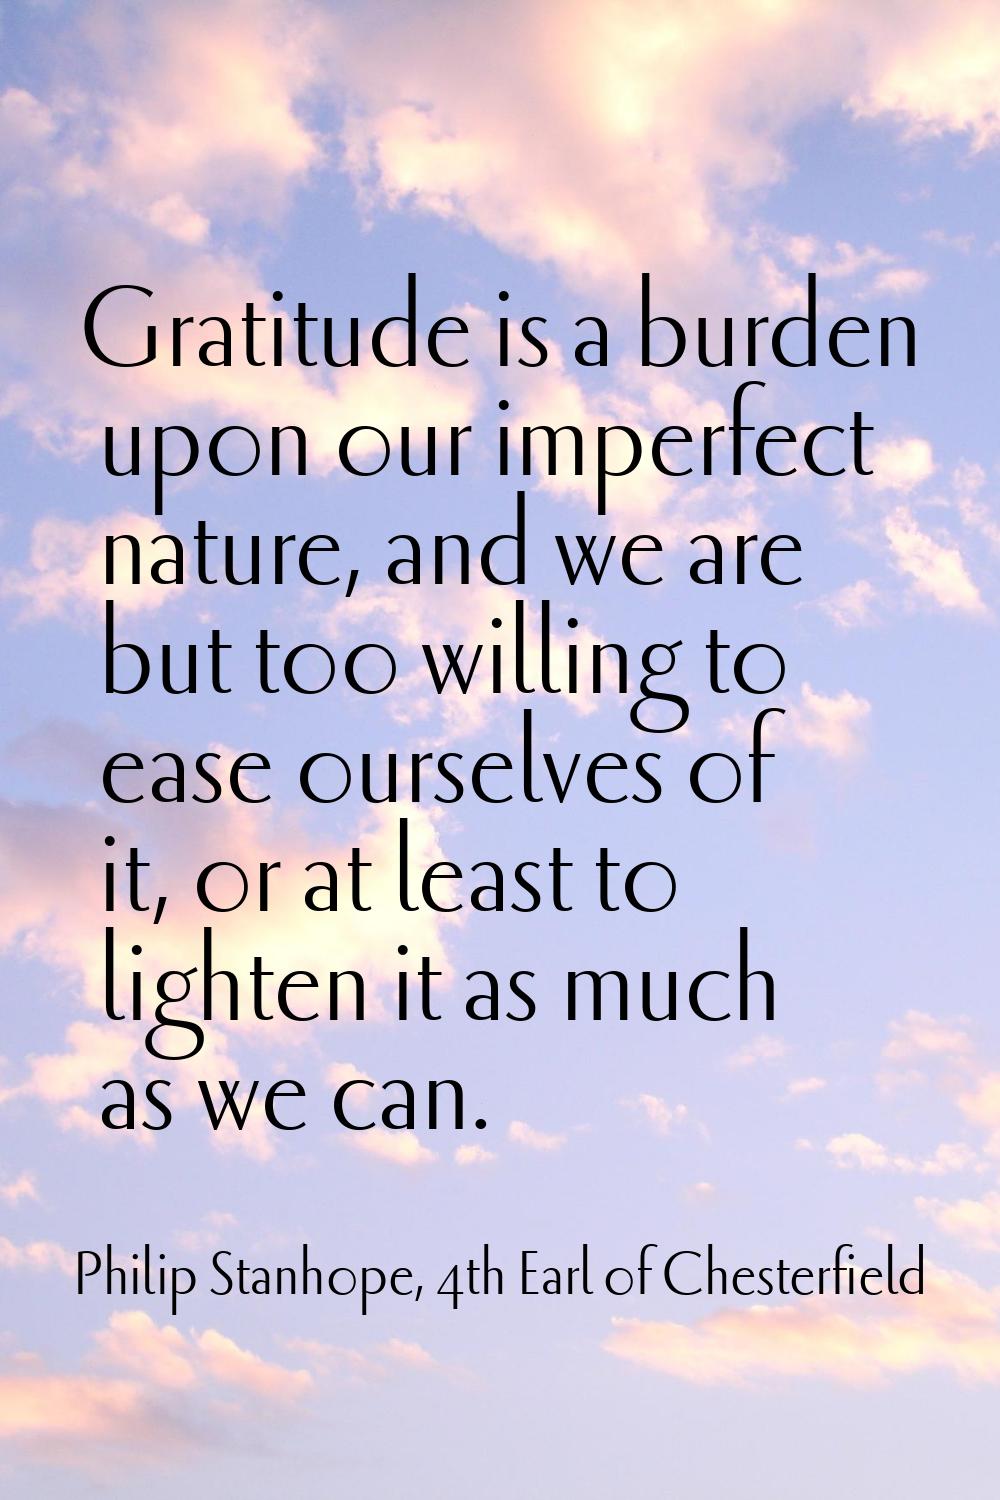 Gratitude is a burden upon our imperfect nature, and we are but too willing to ease ourselves of it